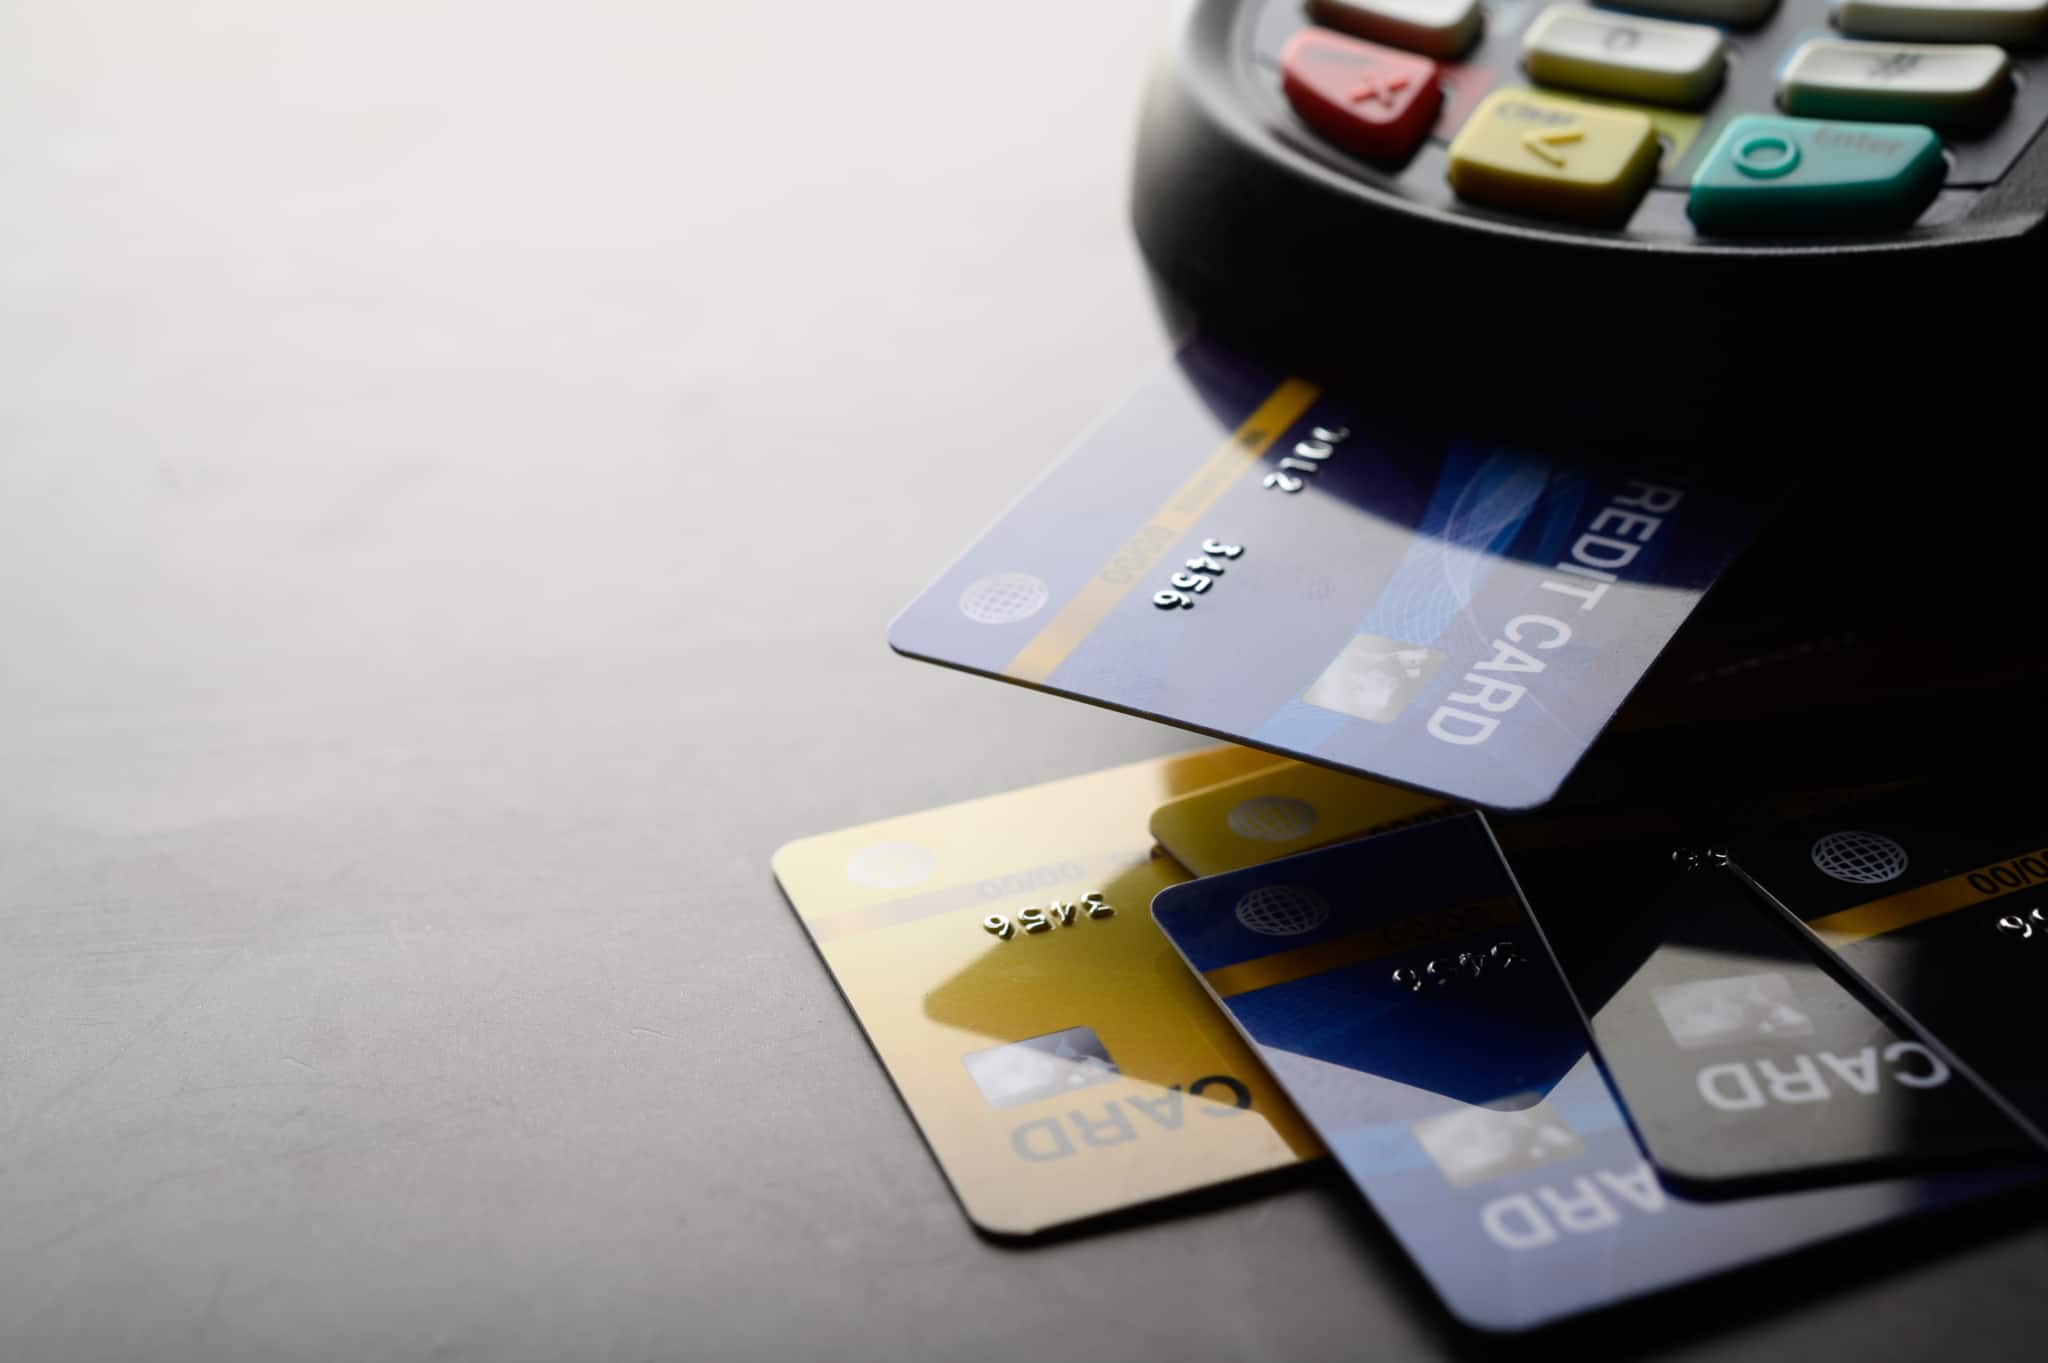 various types of credit cards which are inserted into a payment terminal placed on top of a table